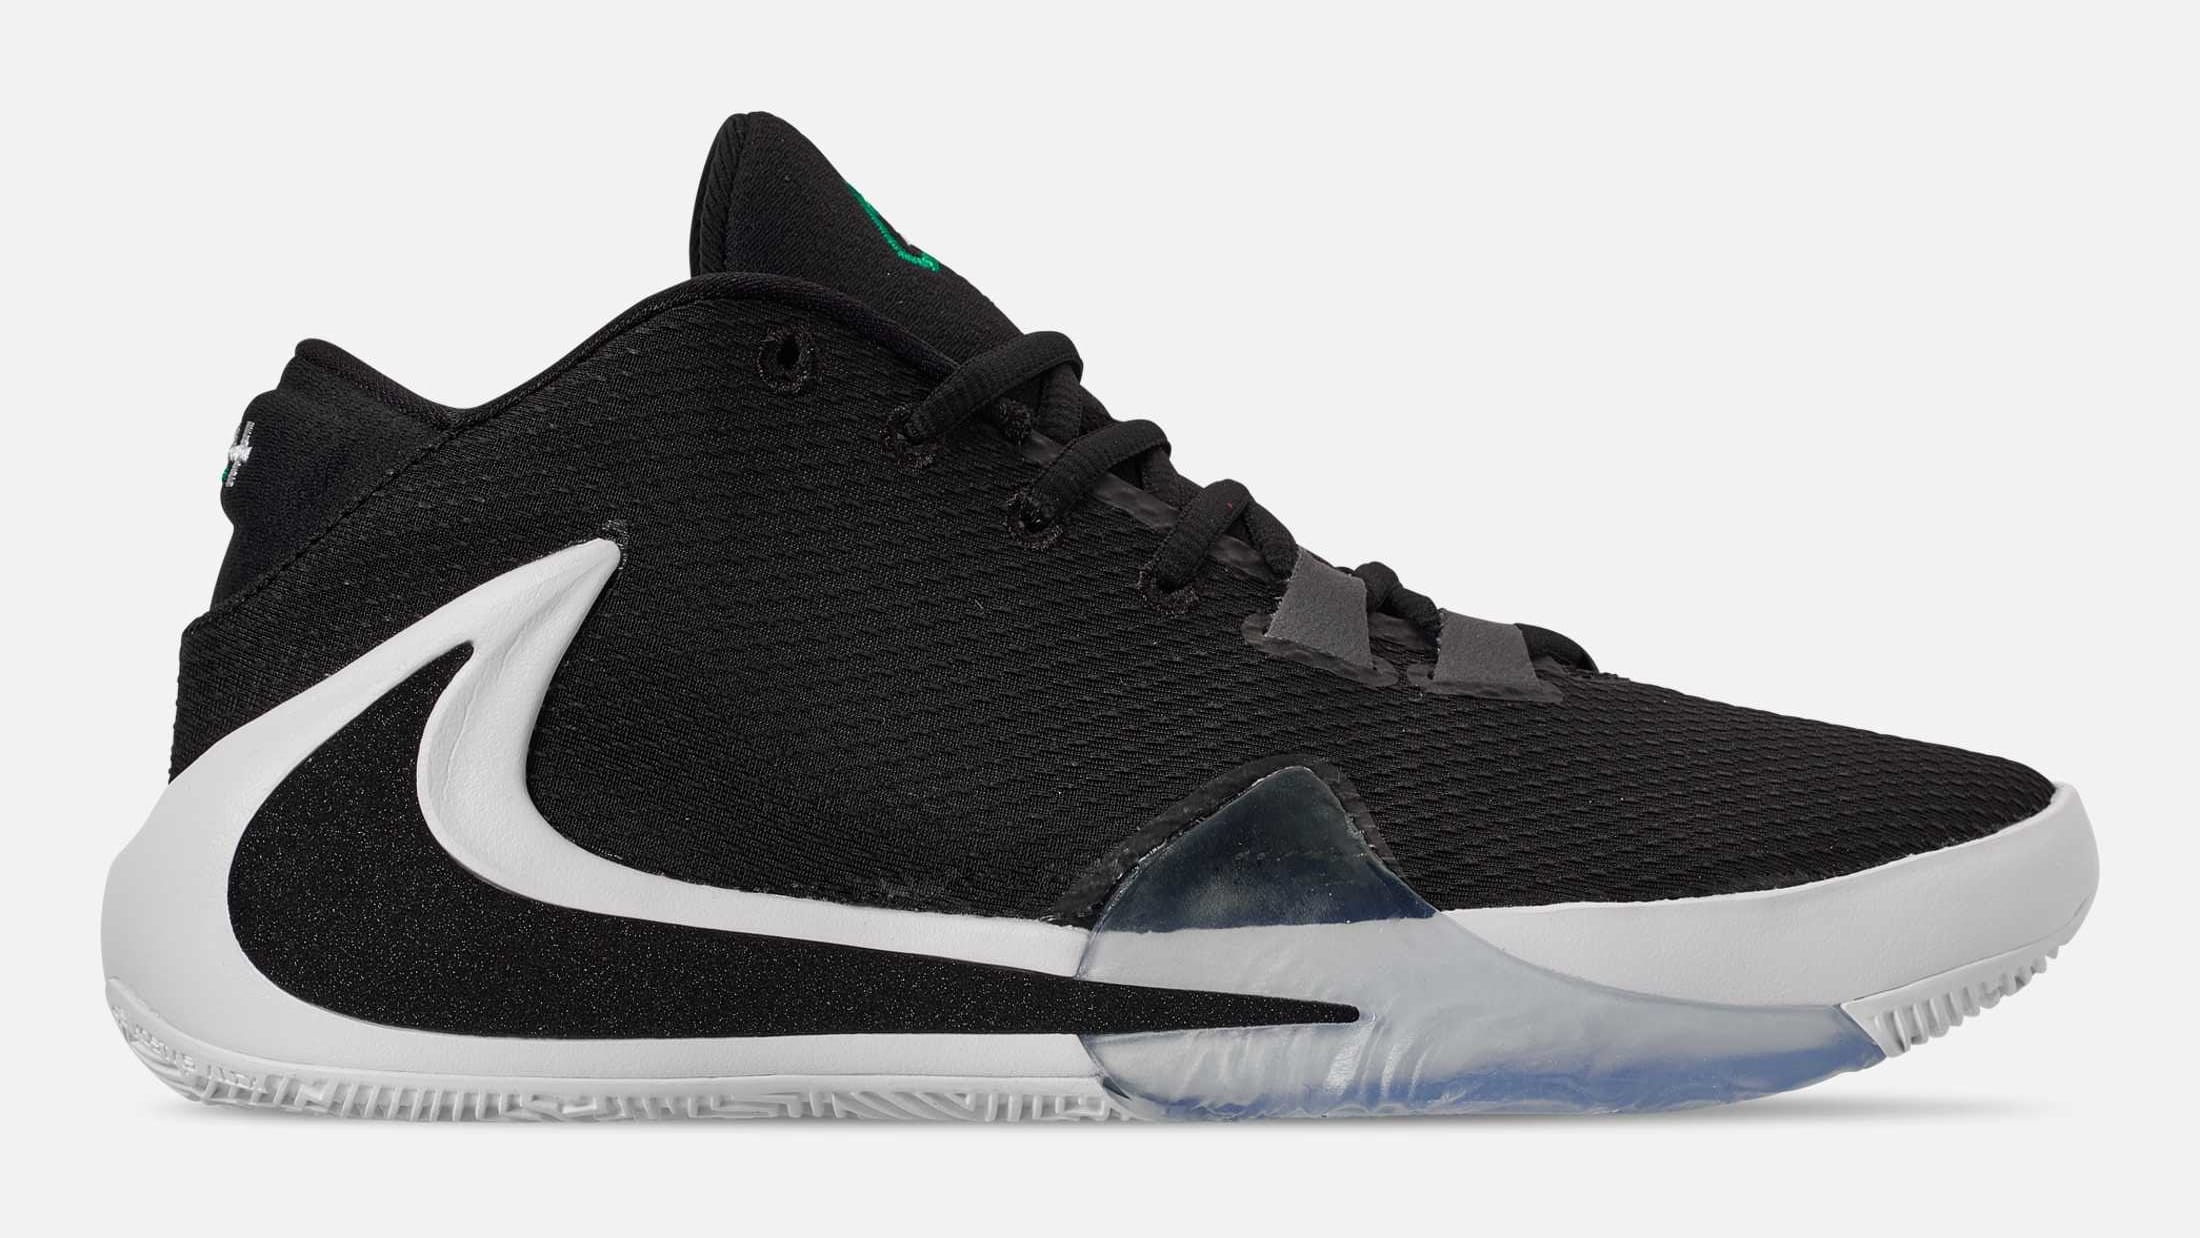 Giannis' Nike Zoom Freak 1 Drops Next Month: Detailed Images2200 x 1238